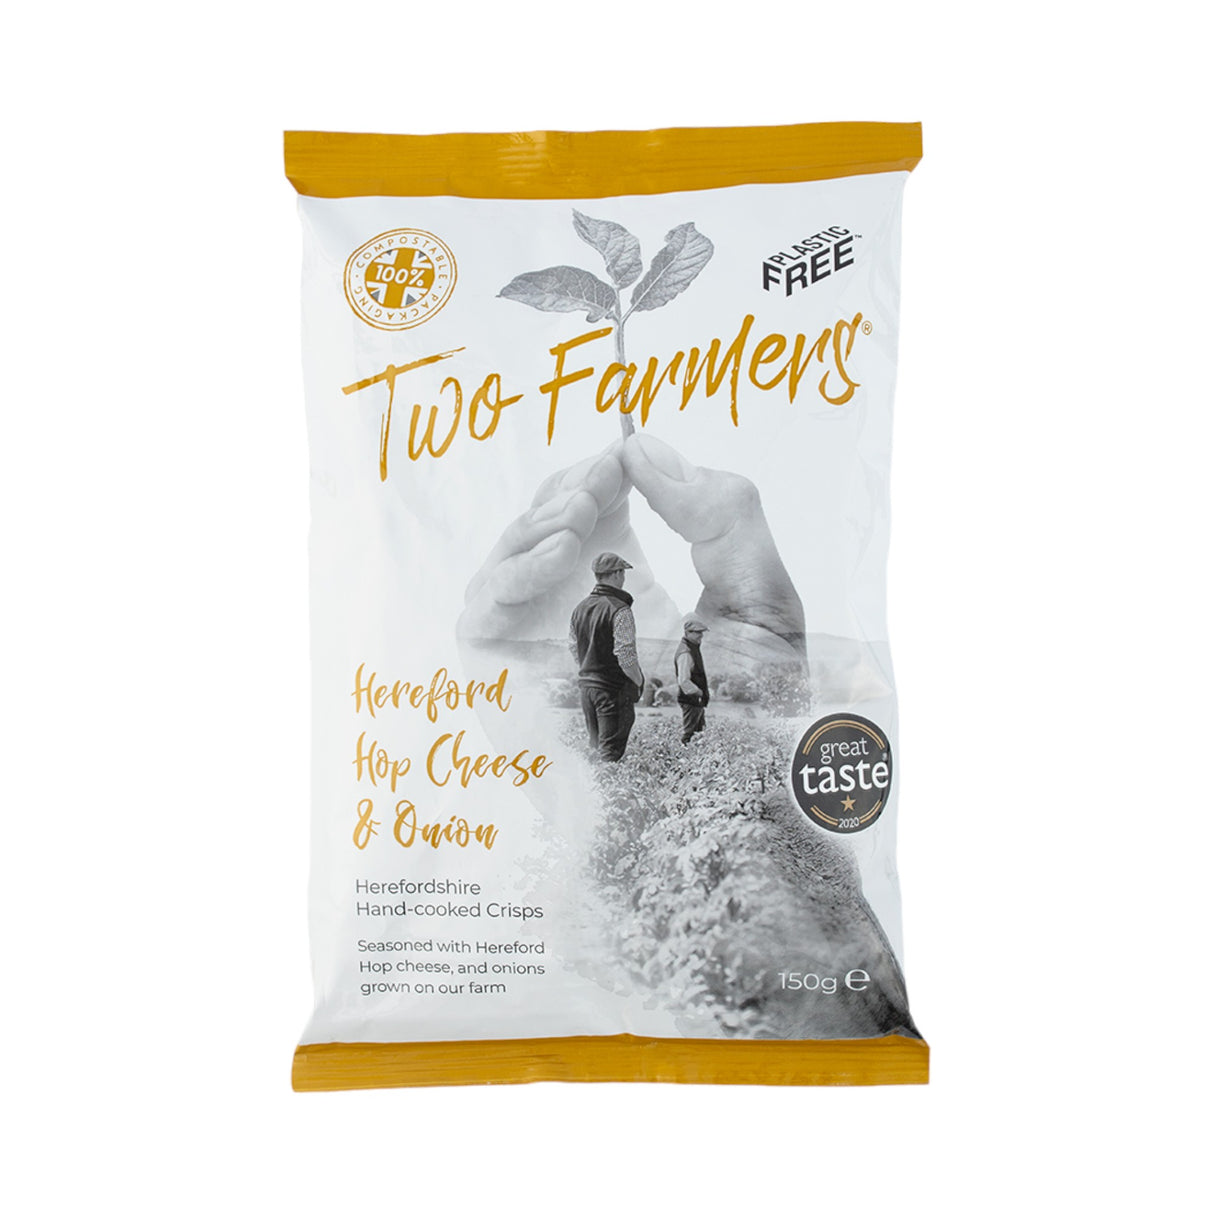 Two Farmers - Hand Cooked Hereford Hop Cheese & Onion Crisps 150g